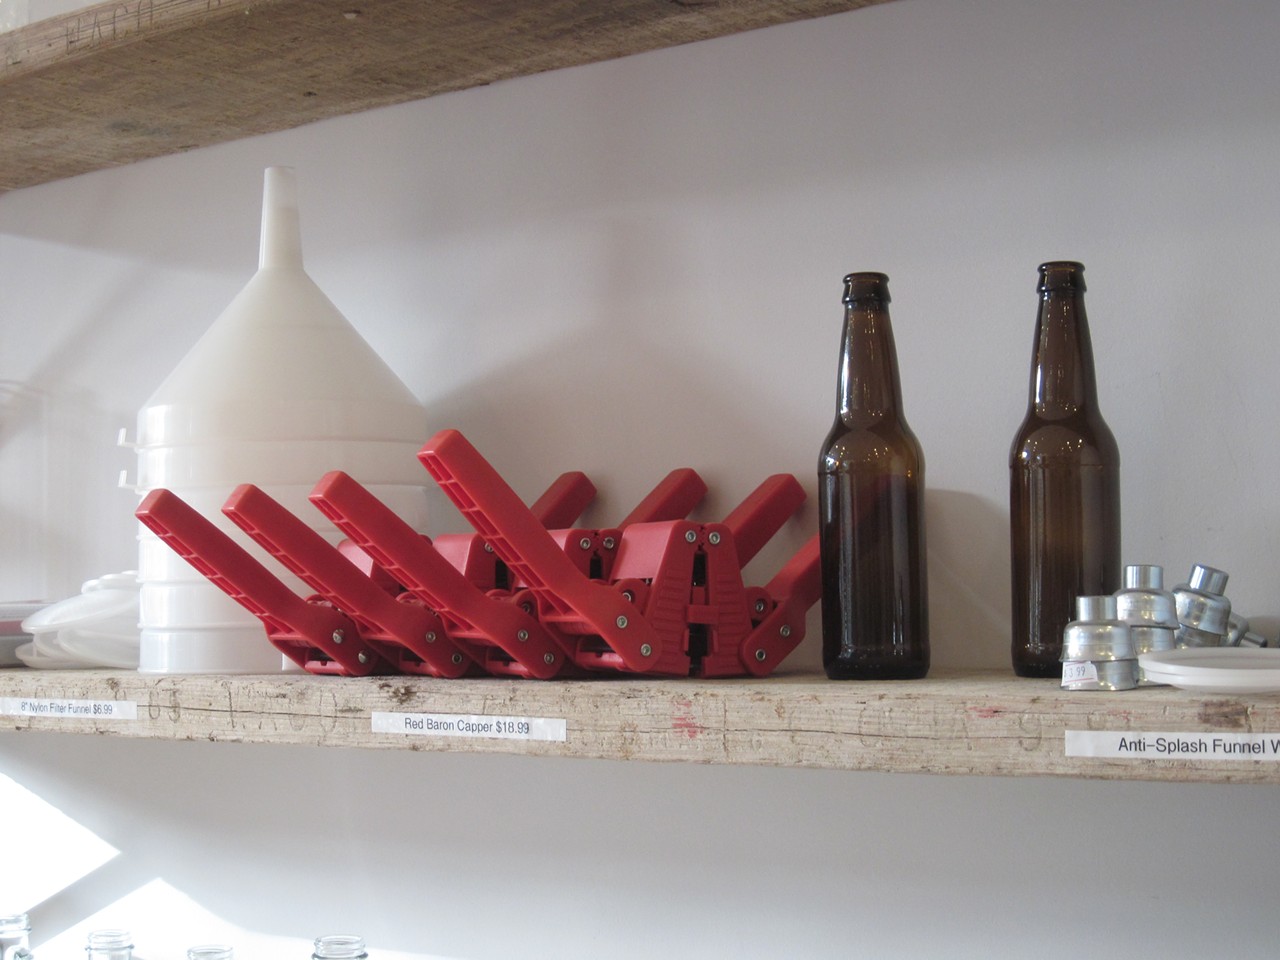 You'll have to wait four to six weeks or so for the beer to fully ferment. Then: Bottle and cap it!